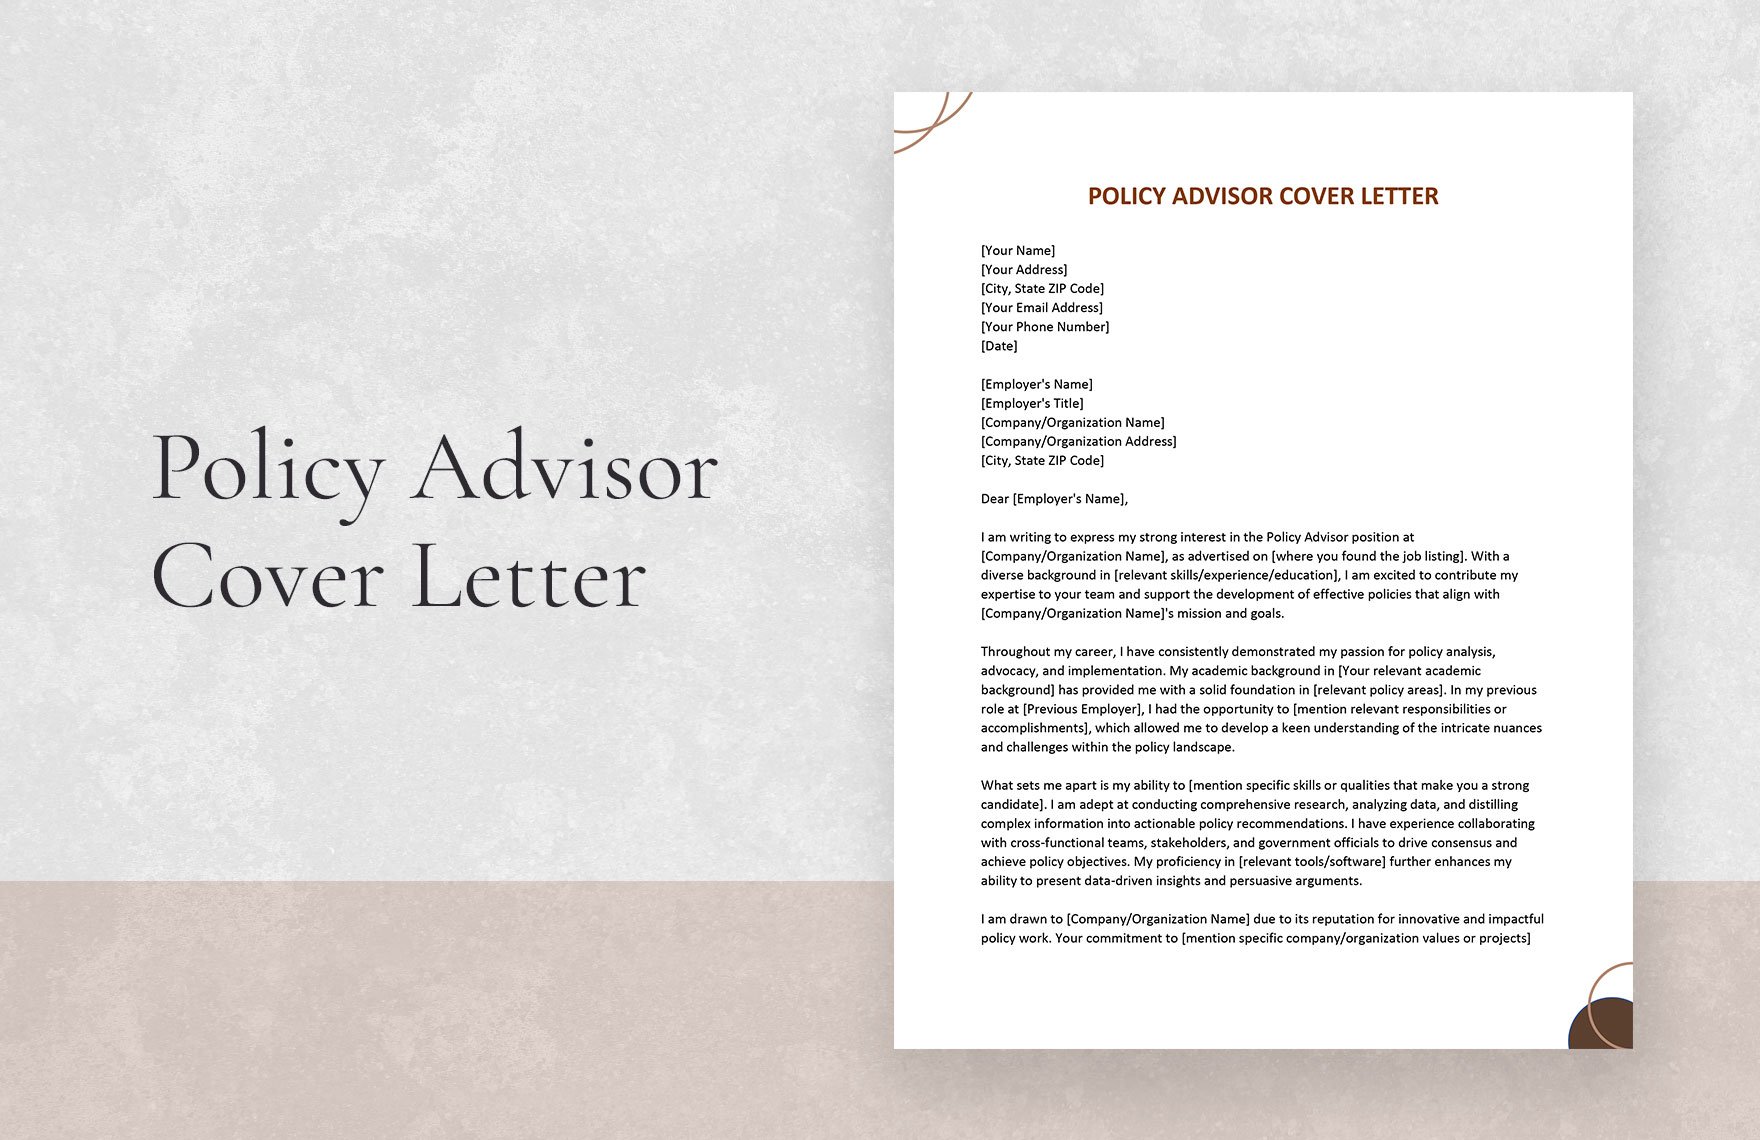 Policy Advisor Cover Letter